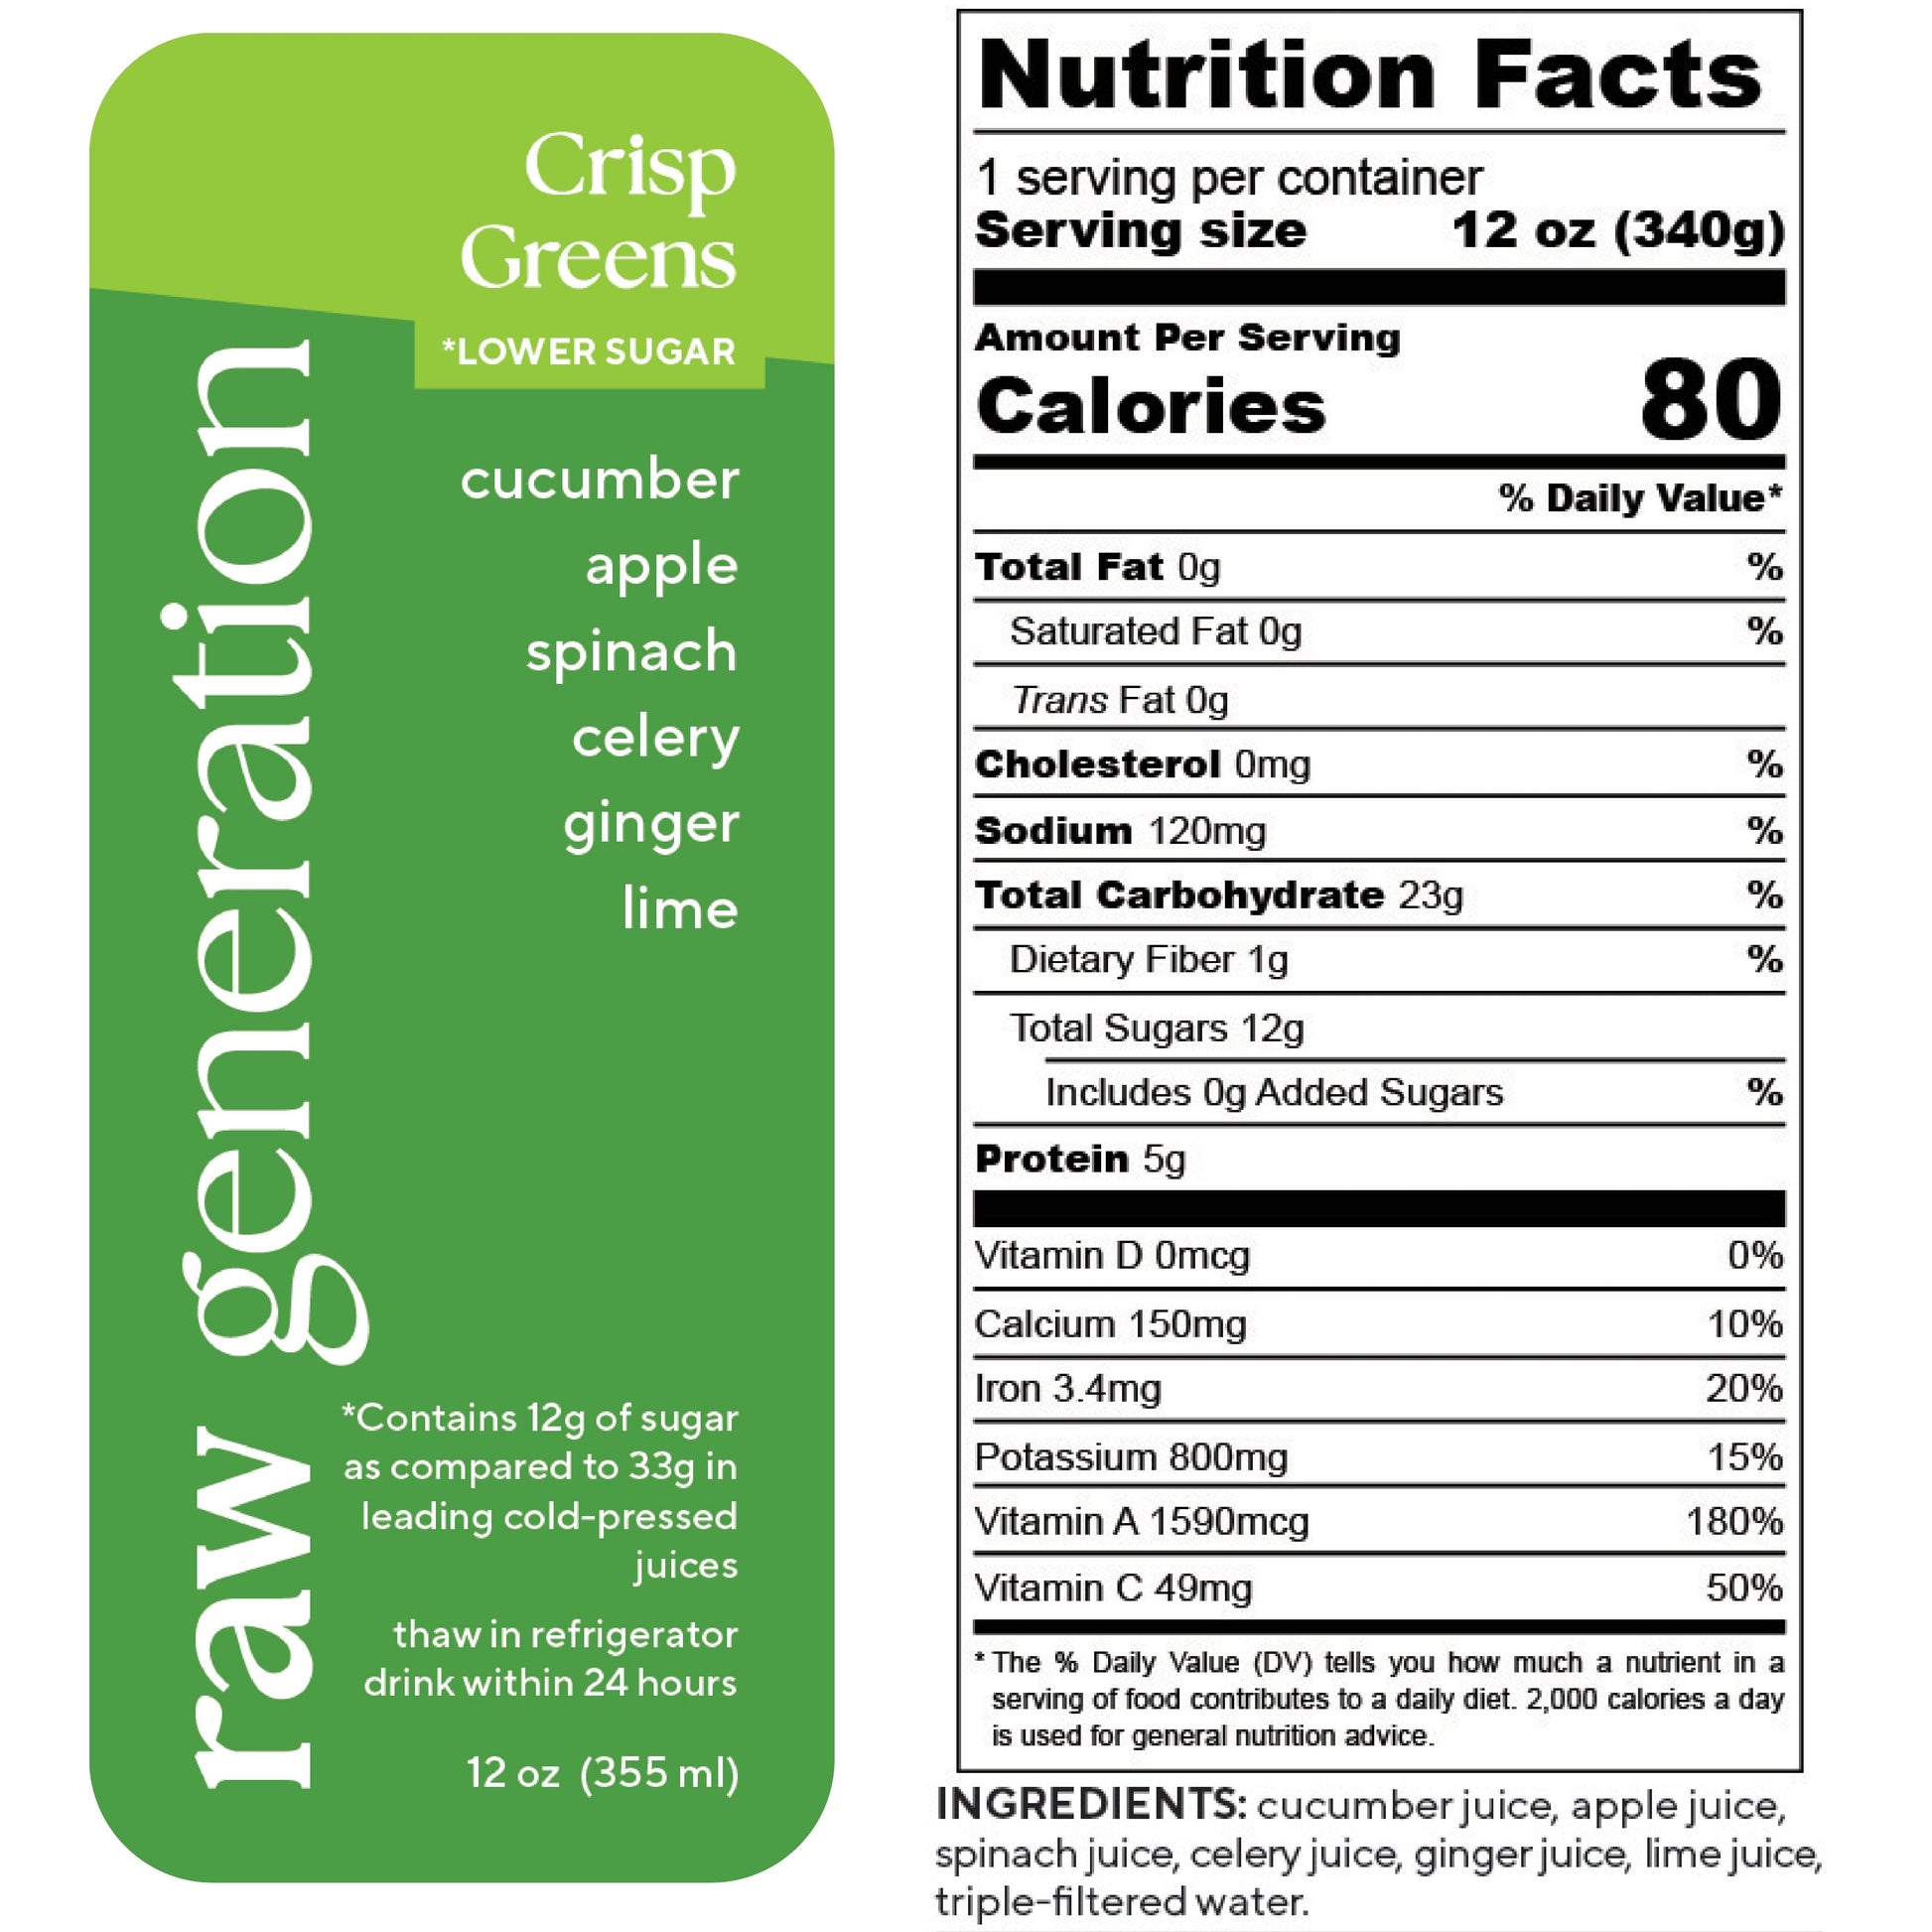 Nutrition Facts, 1 serving/container, 12 oz (340g), Calories 80, Total Fat 0g, Saturated Fat 0g, Trans Fat 0g, Cholesterol 0mg, Sodium 120mg, Total Carbohydrate 23g, Dietary Fiber 1g, Total Sugars 12g, Added Sugars 0g, Protein 5g, Vitamin D 0mcg, Calcium 150mg, Iron 3.4mg, Potassium 800mg, Vitamin A 1590mcg, Vitamin C 49mg; Ingredients: cucumber juice, apple juice, spinach juice, celery juice, ginger juice, lime juice, triple-filtered water.